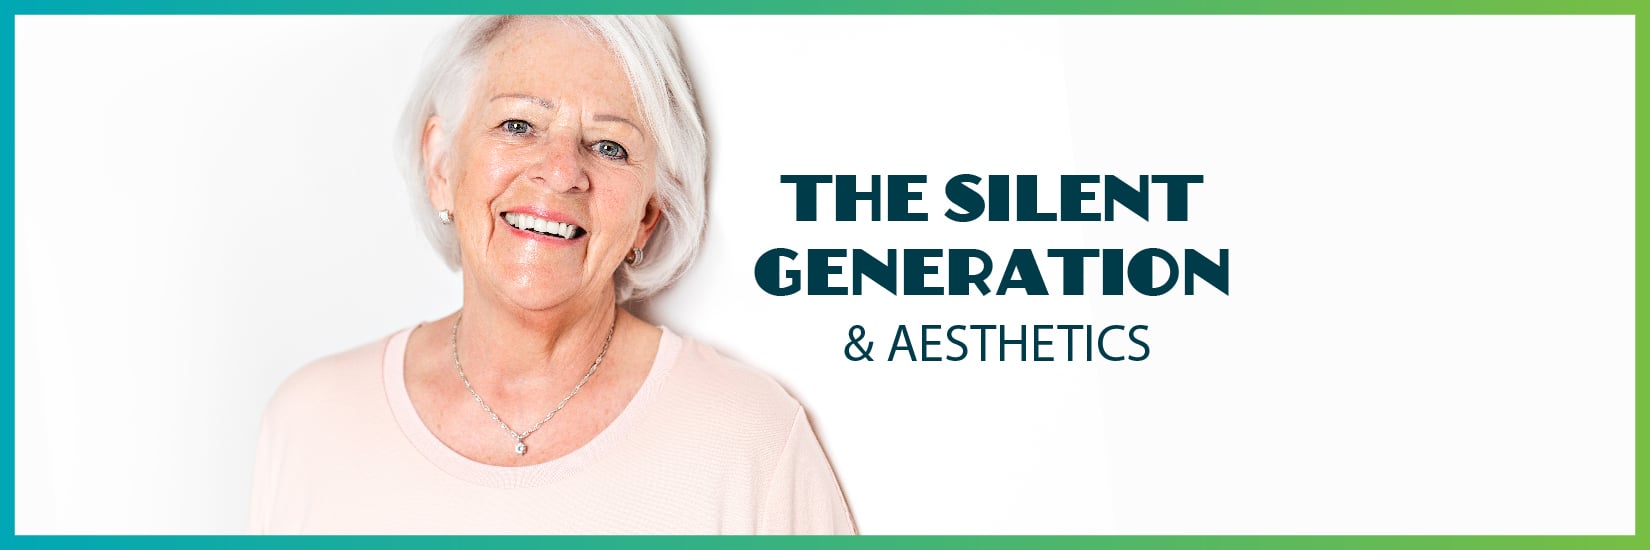 Everything You Need to Know About Aesthetics for the Silent Generation